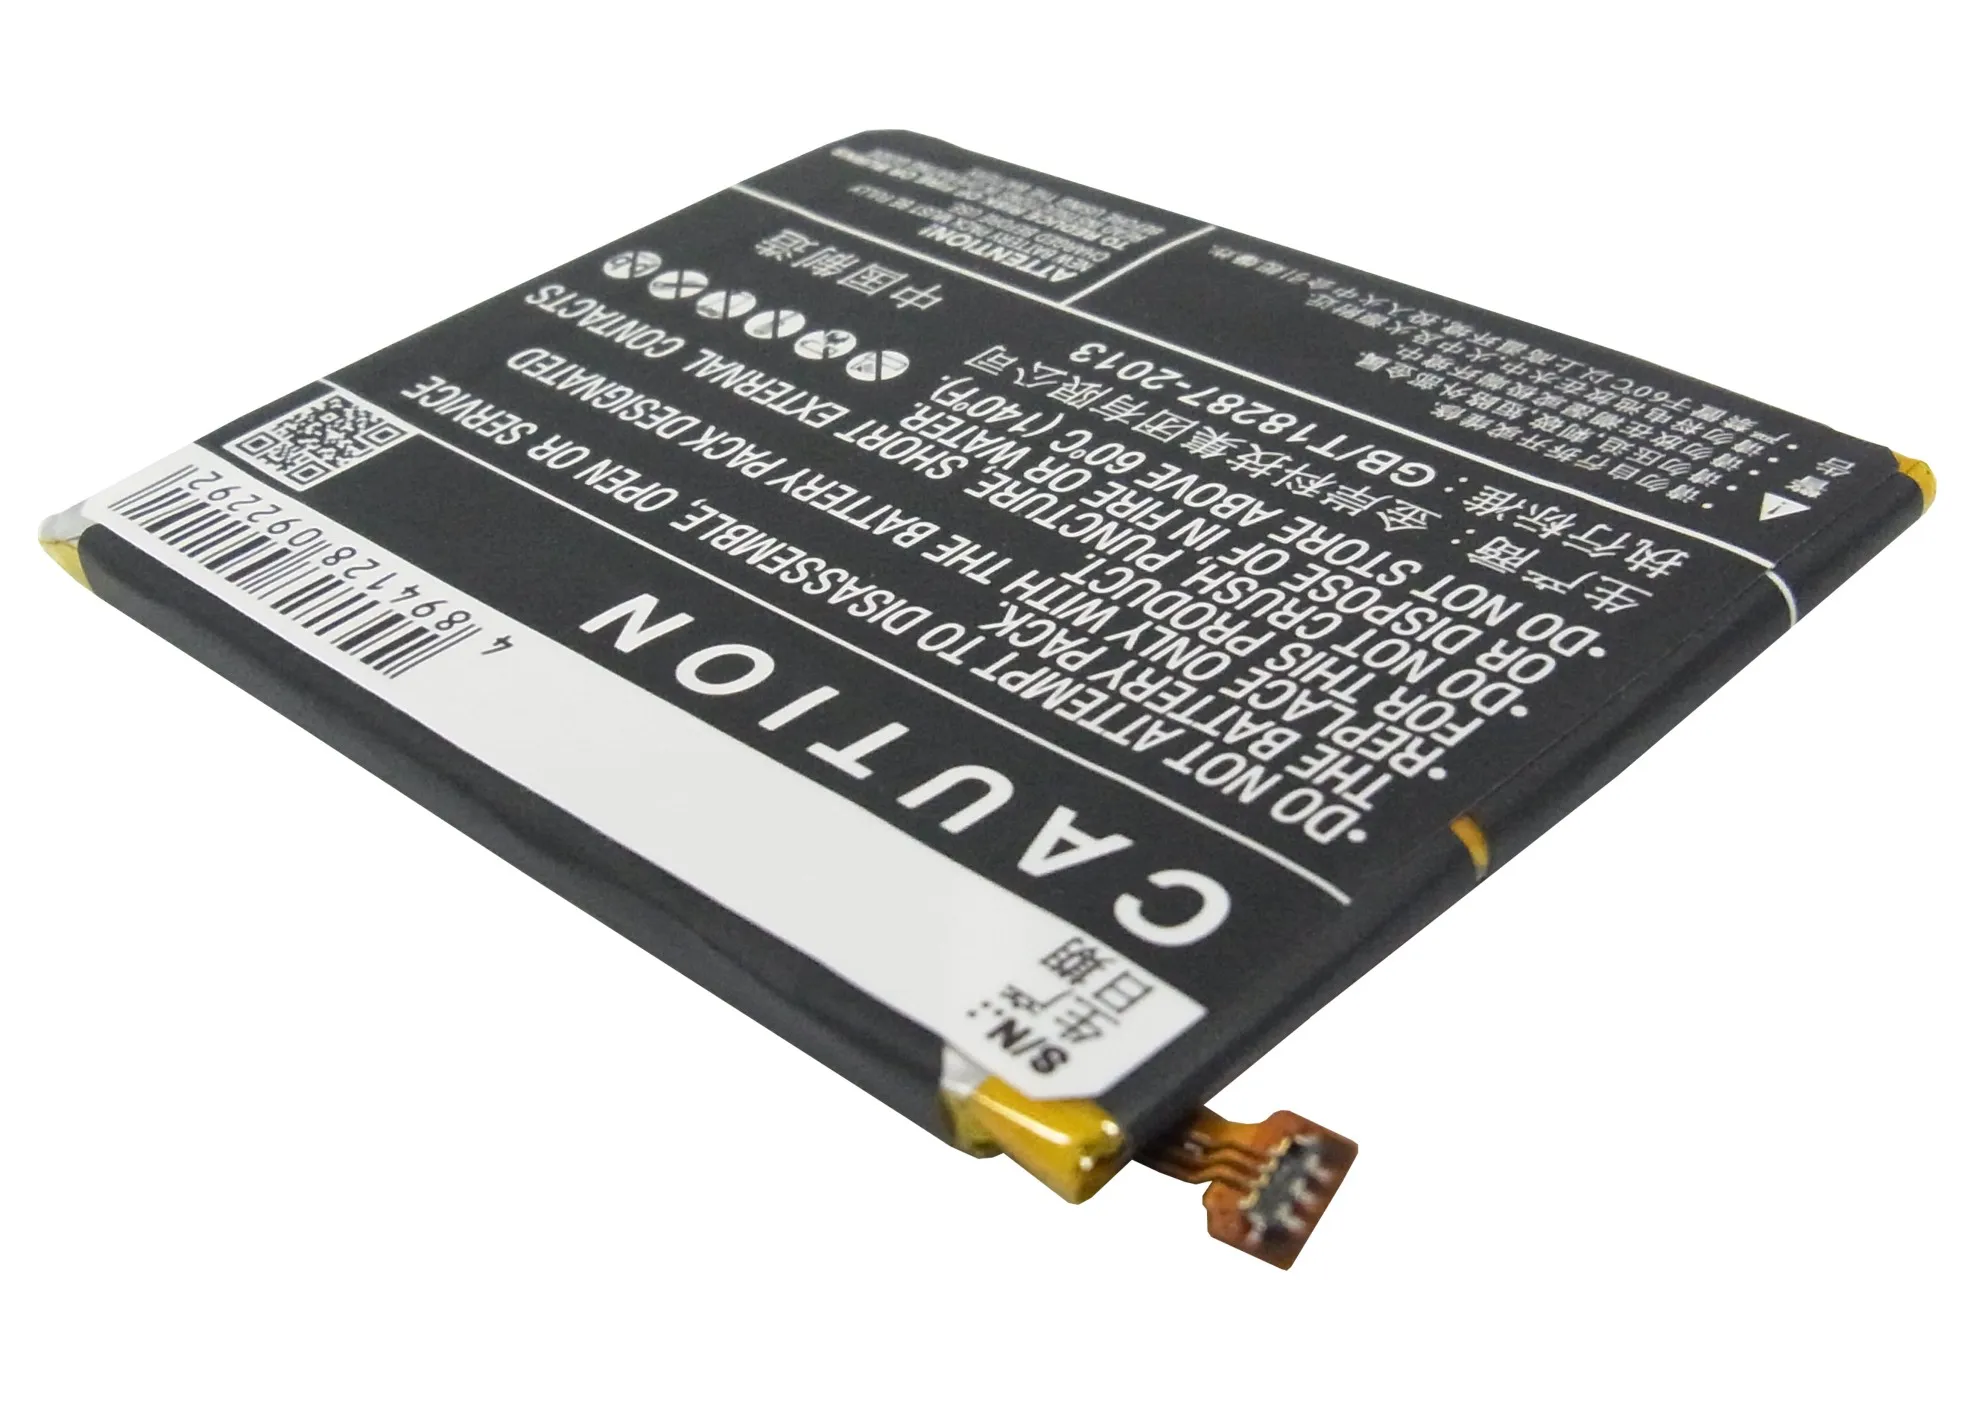 Cameron Sino 2100mAh Battery BL-N2100 for GIONEE GN706, GN706L